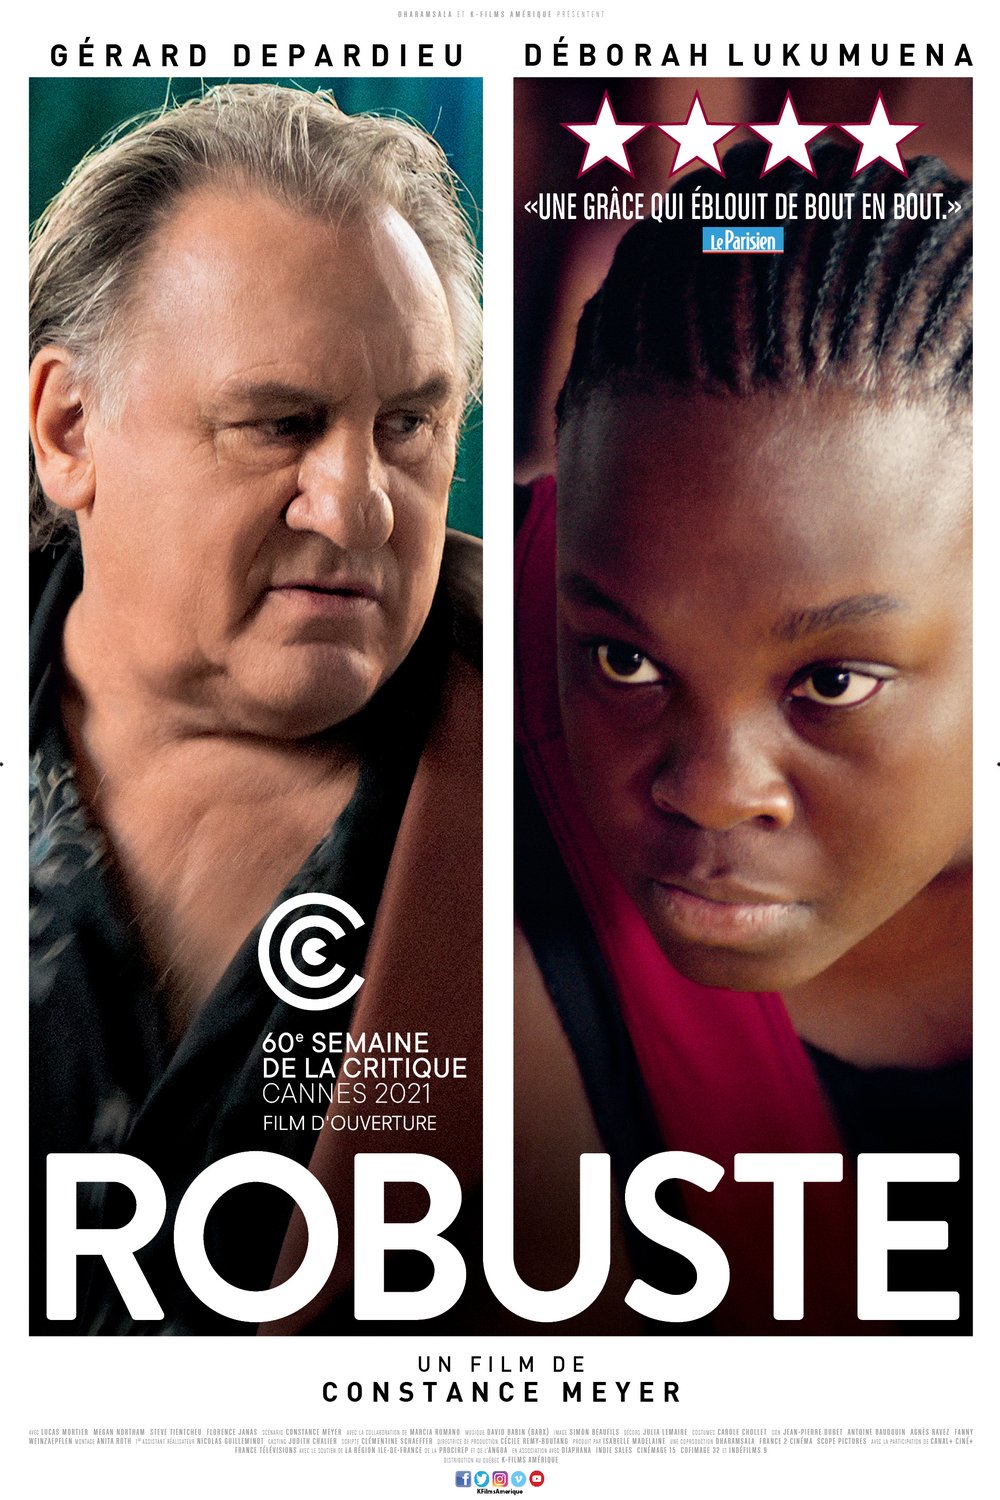 Poster of the movie Robuste